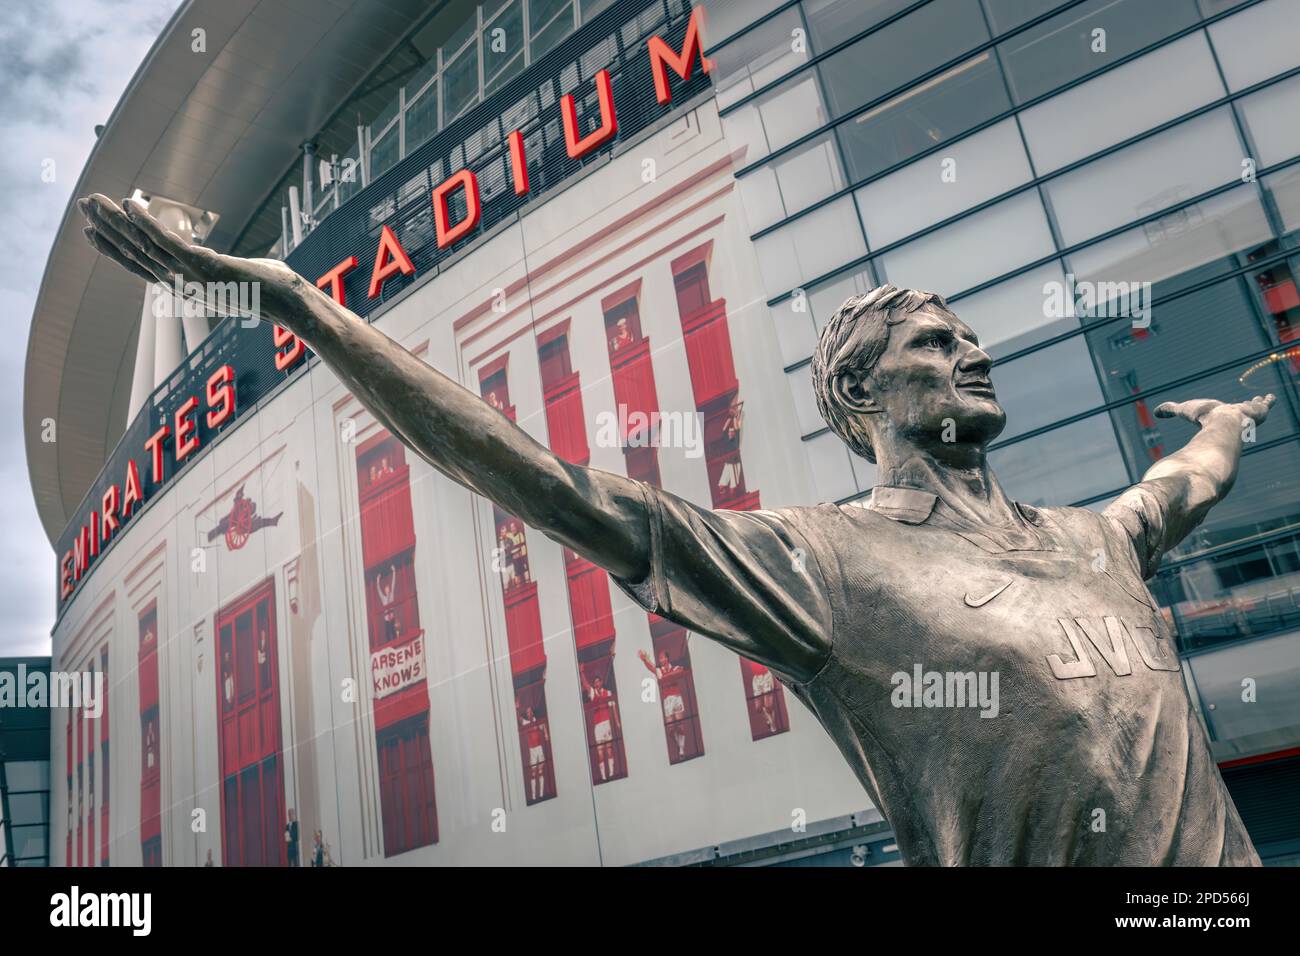 The Statue of former Arsenal and England Captain, Tony Adams MBE, outside the Emirates Stadium in Islington, London. Centre back Adams spent his entir Stock Photo